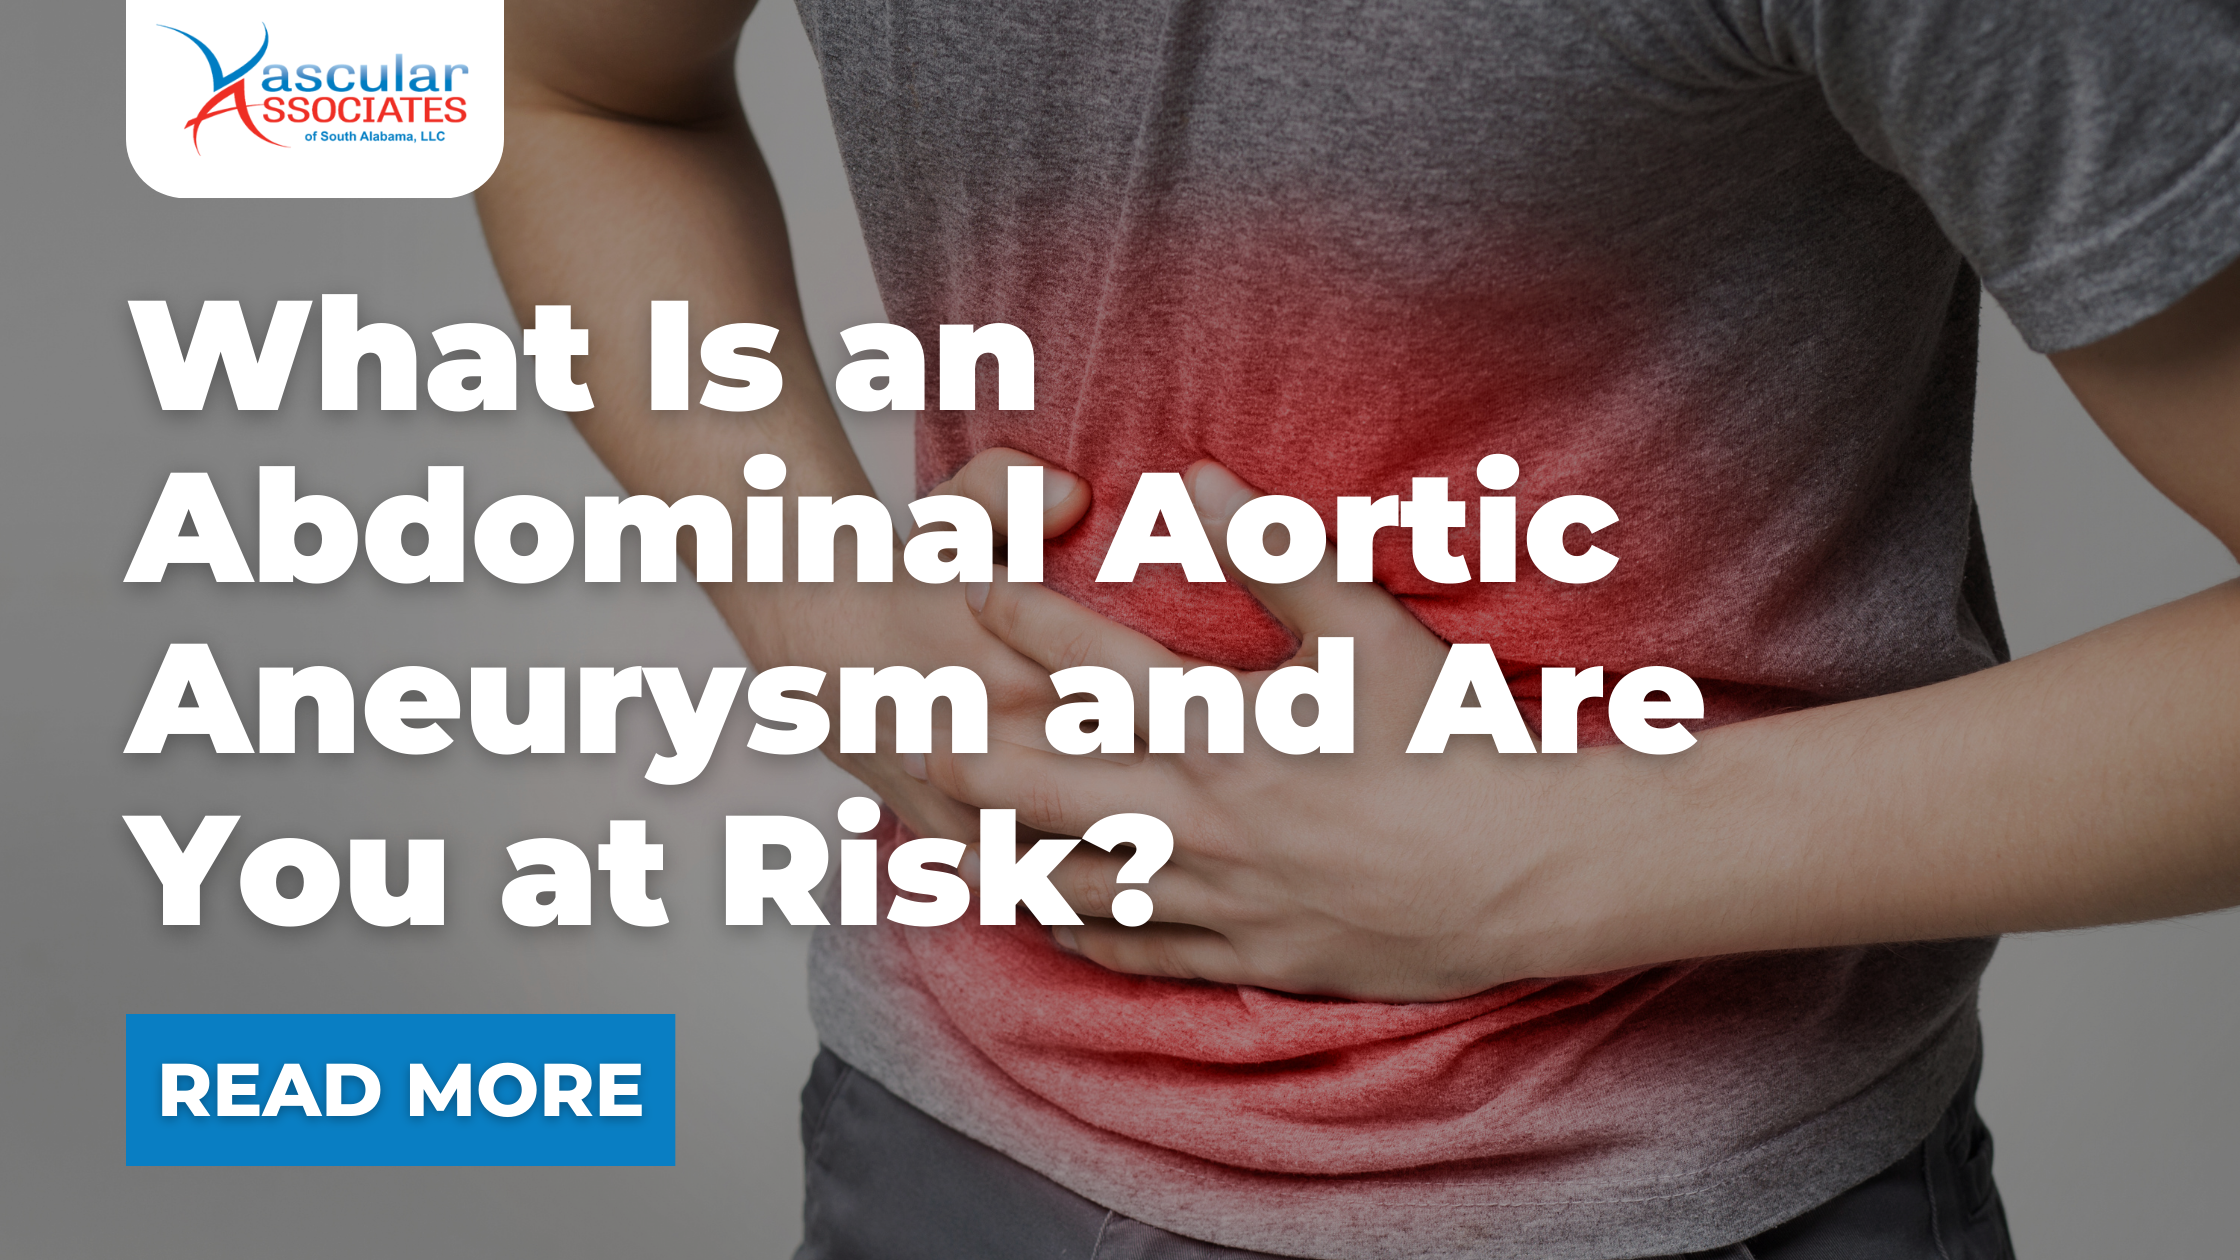 Vascular Blog - What Is an Abdominal Aortic Aneurysm and Are You at Risk.png